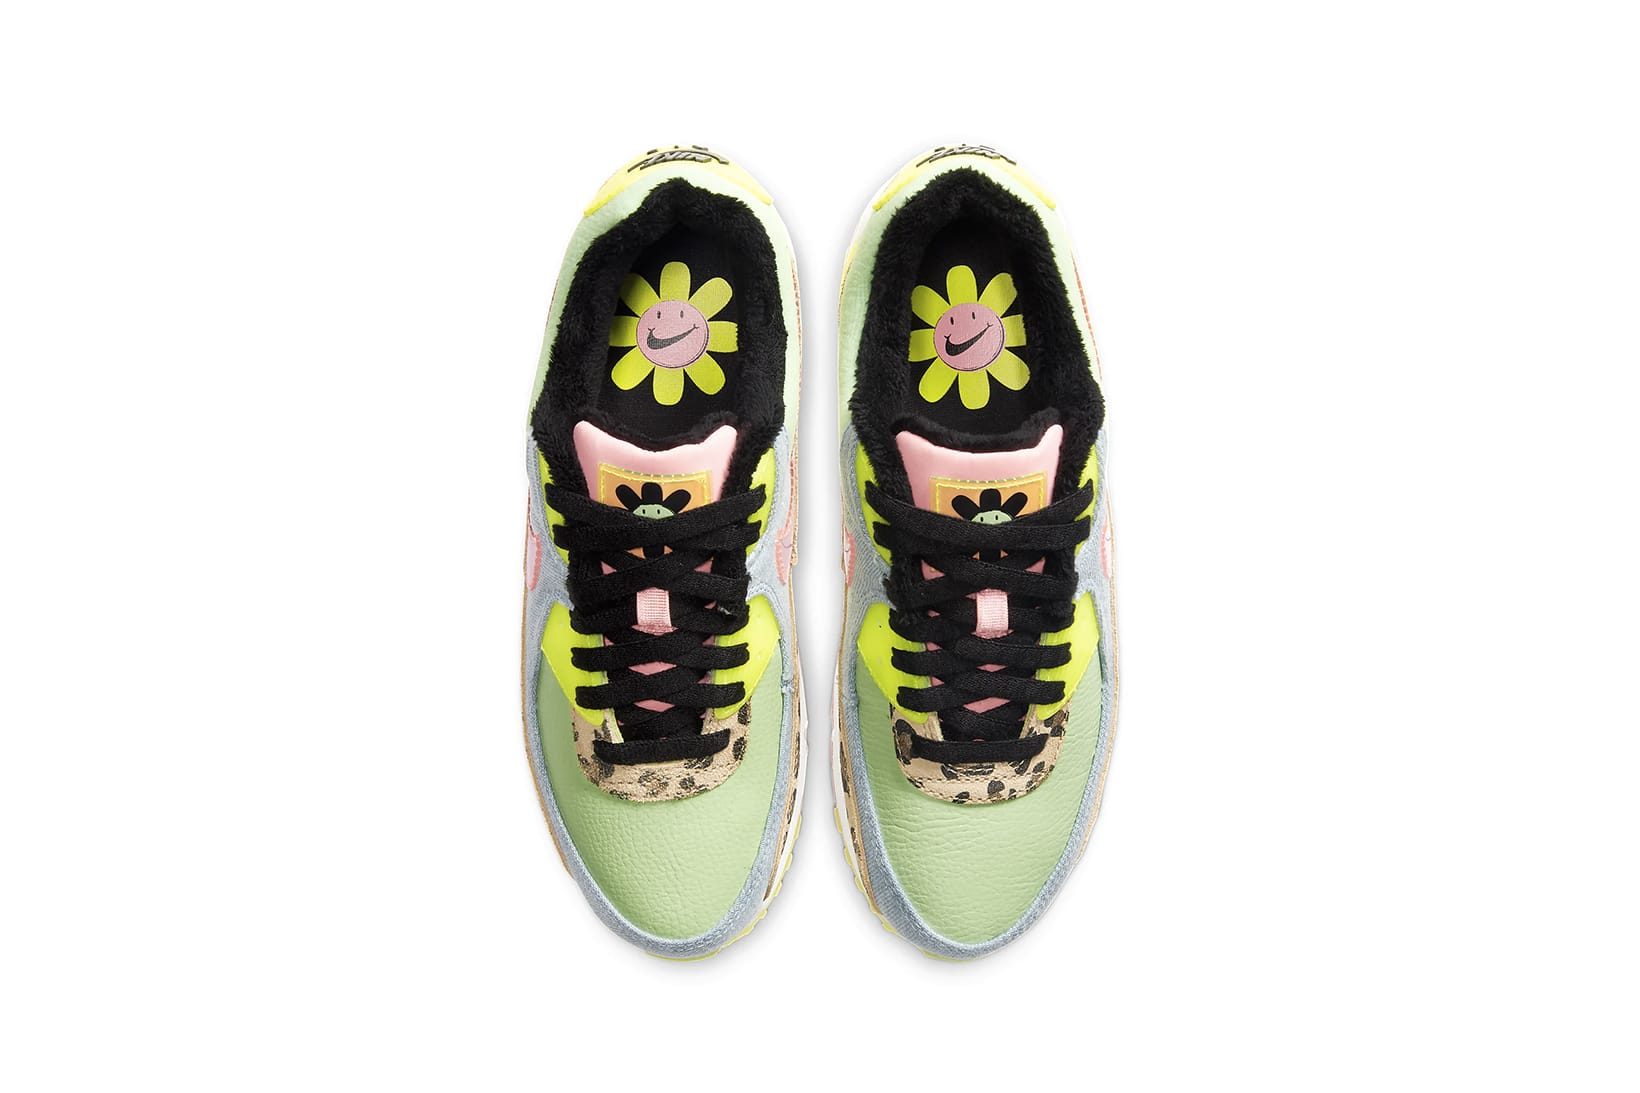 Nike Air Max 90 in Neon Green with 